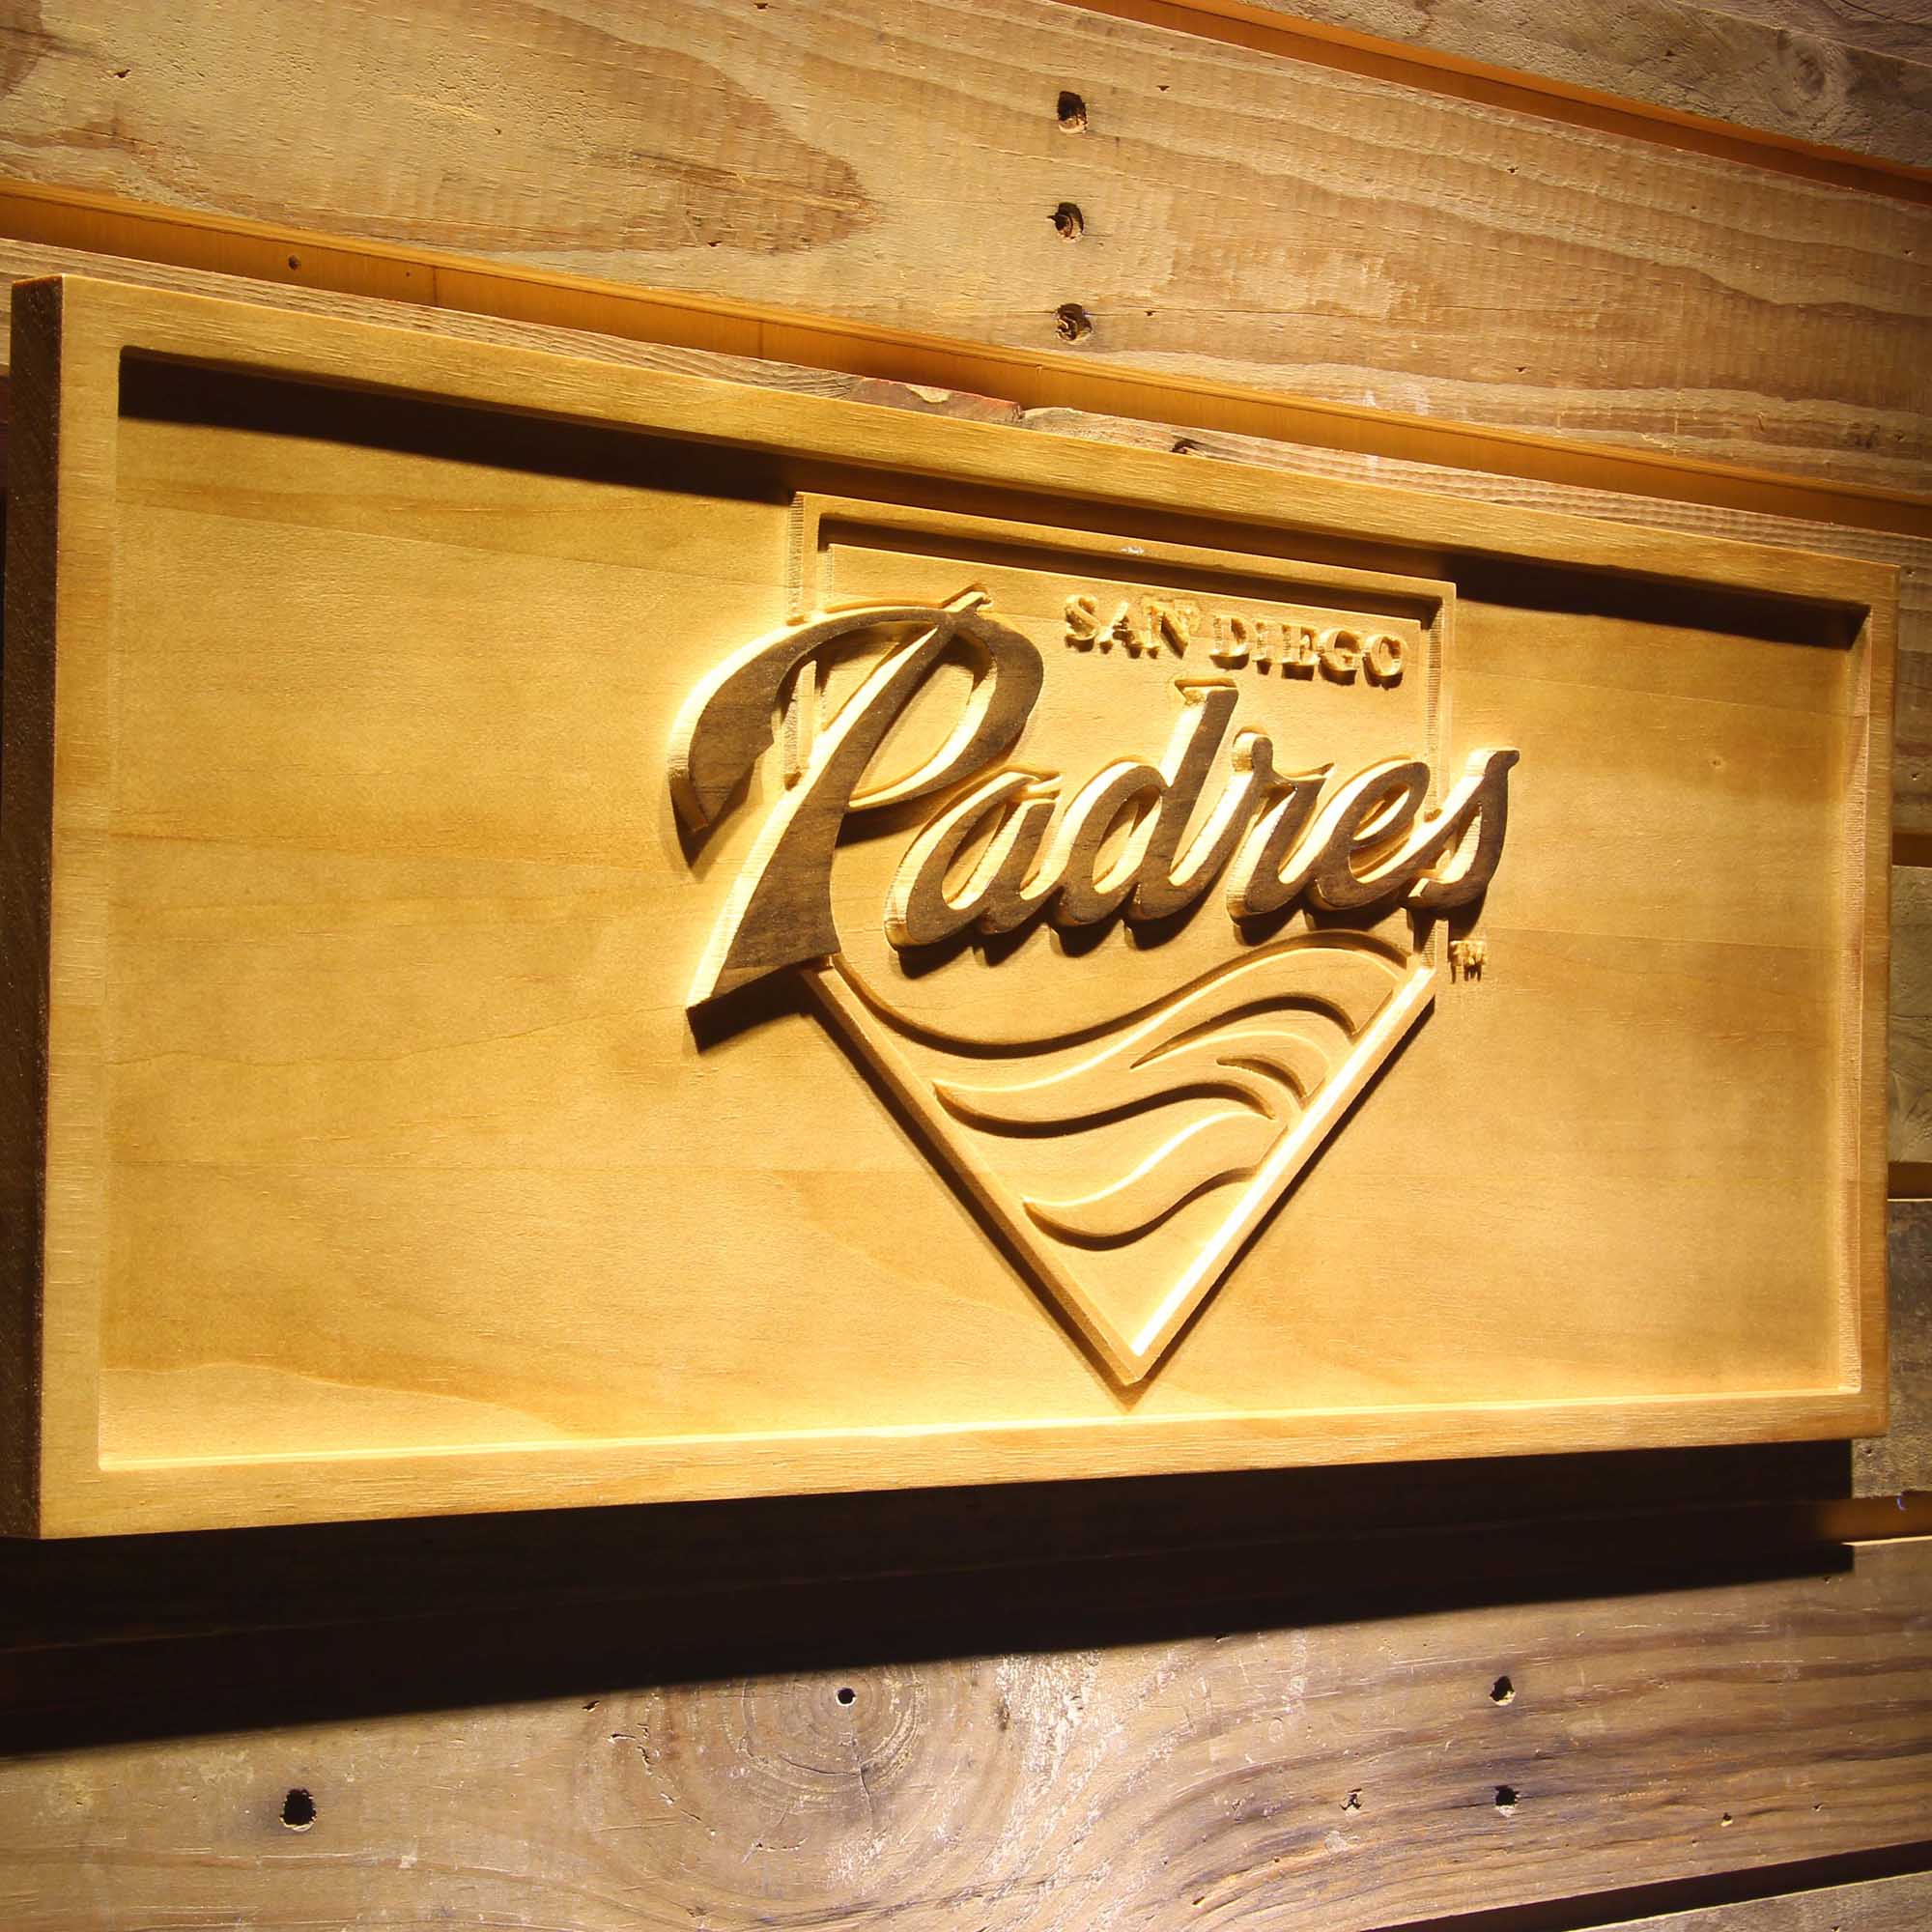 San Diego Padres 3D Solid Wooden Craving Sign